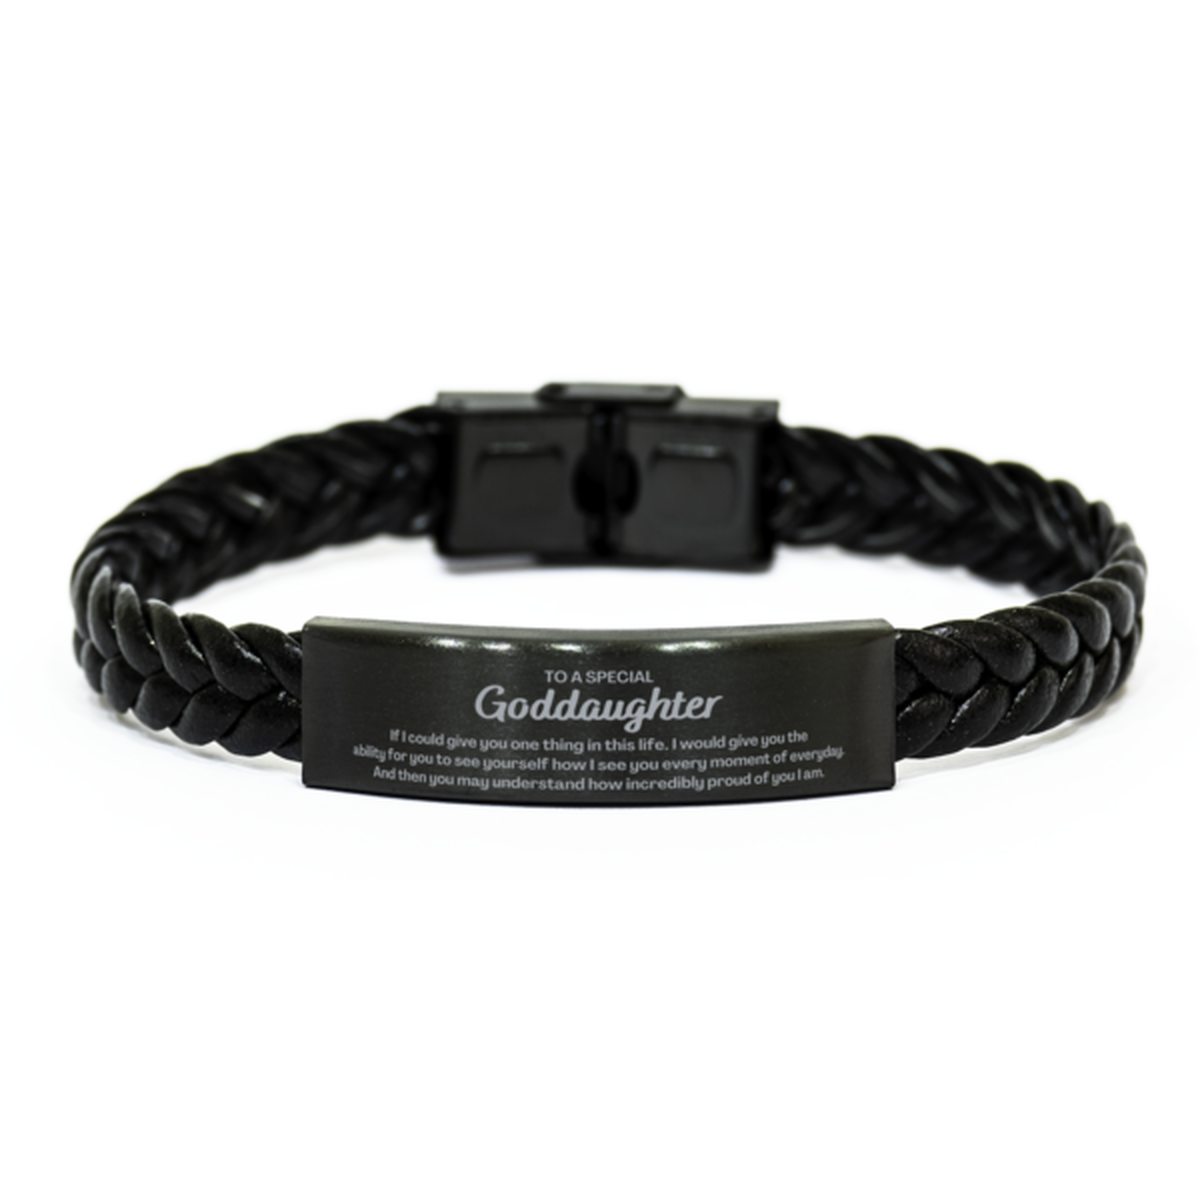 To My Goddaughter Braided Leather Bracelet, Gifts For Goddaughter Engraved, Inspirational Gifts for Christmas Birthday, Epic Gifts for Goddaughter To A Special Goddaughter how incredibly proud of you I am